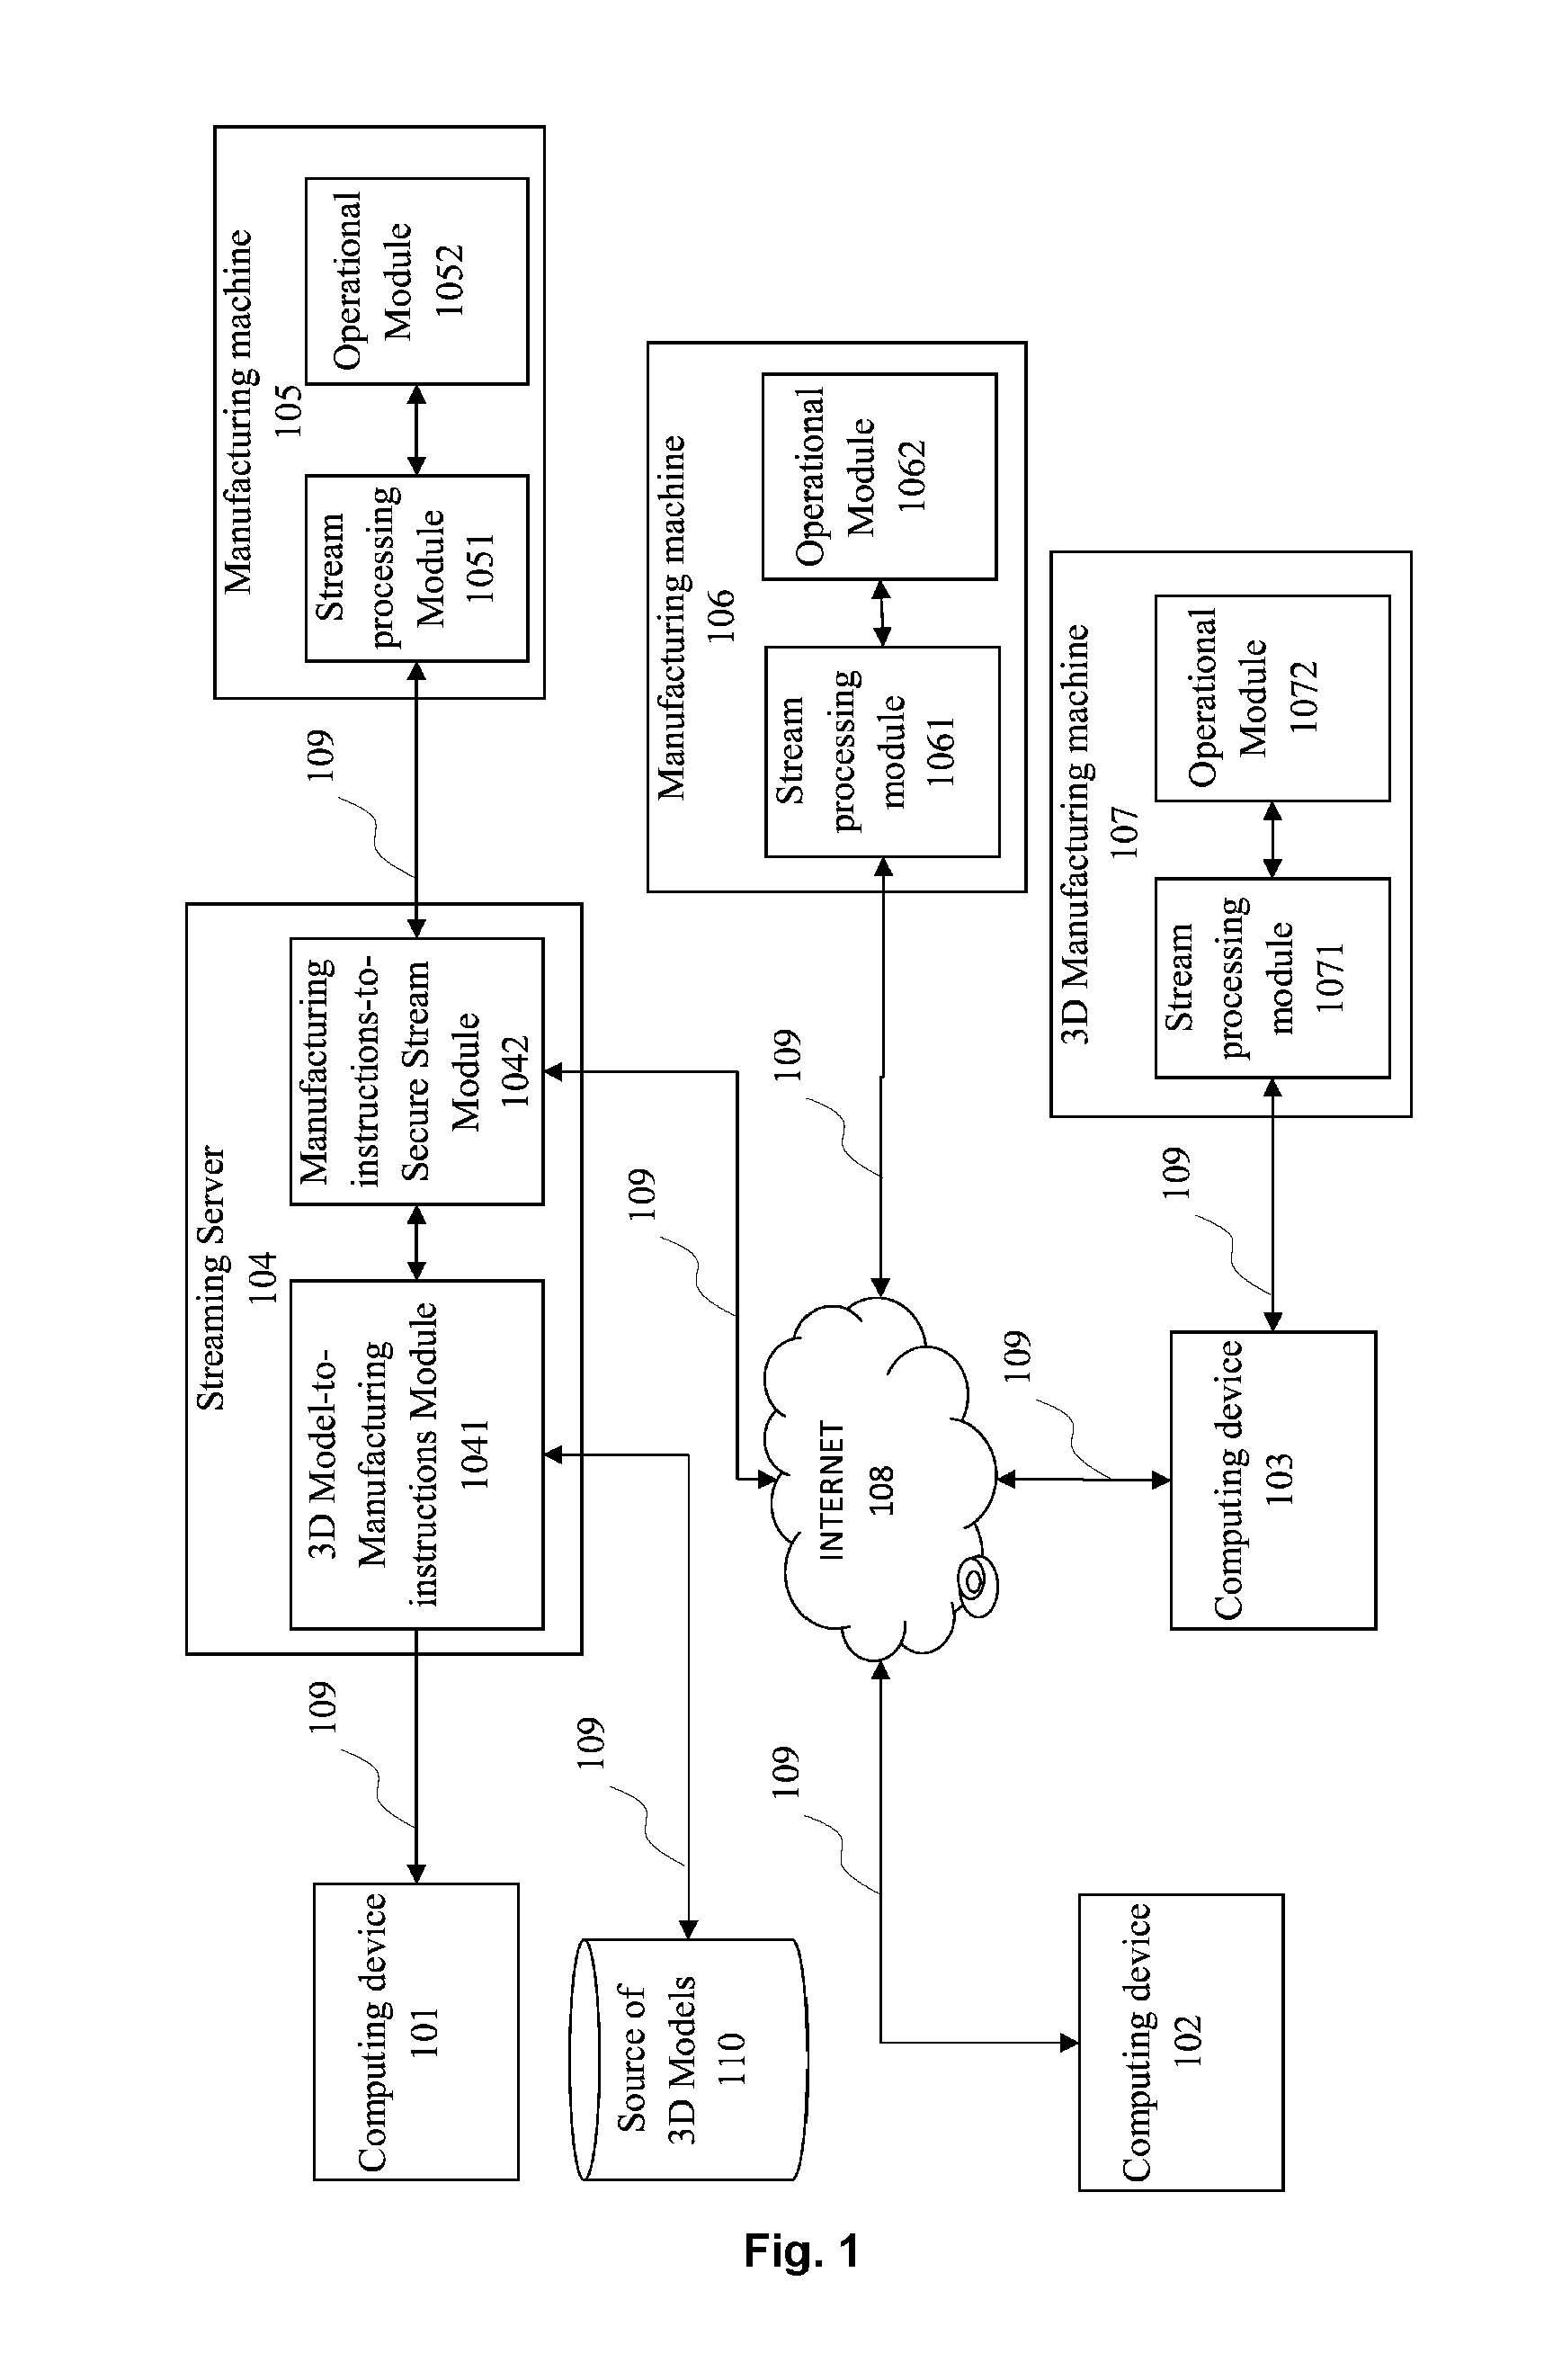 Secure streaming method in a numerically controlled manufacturing system, and a secure numerically controlled manufacturing system